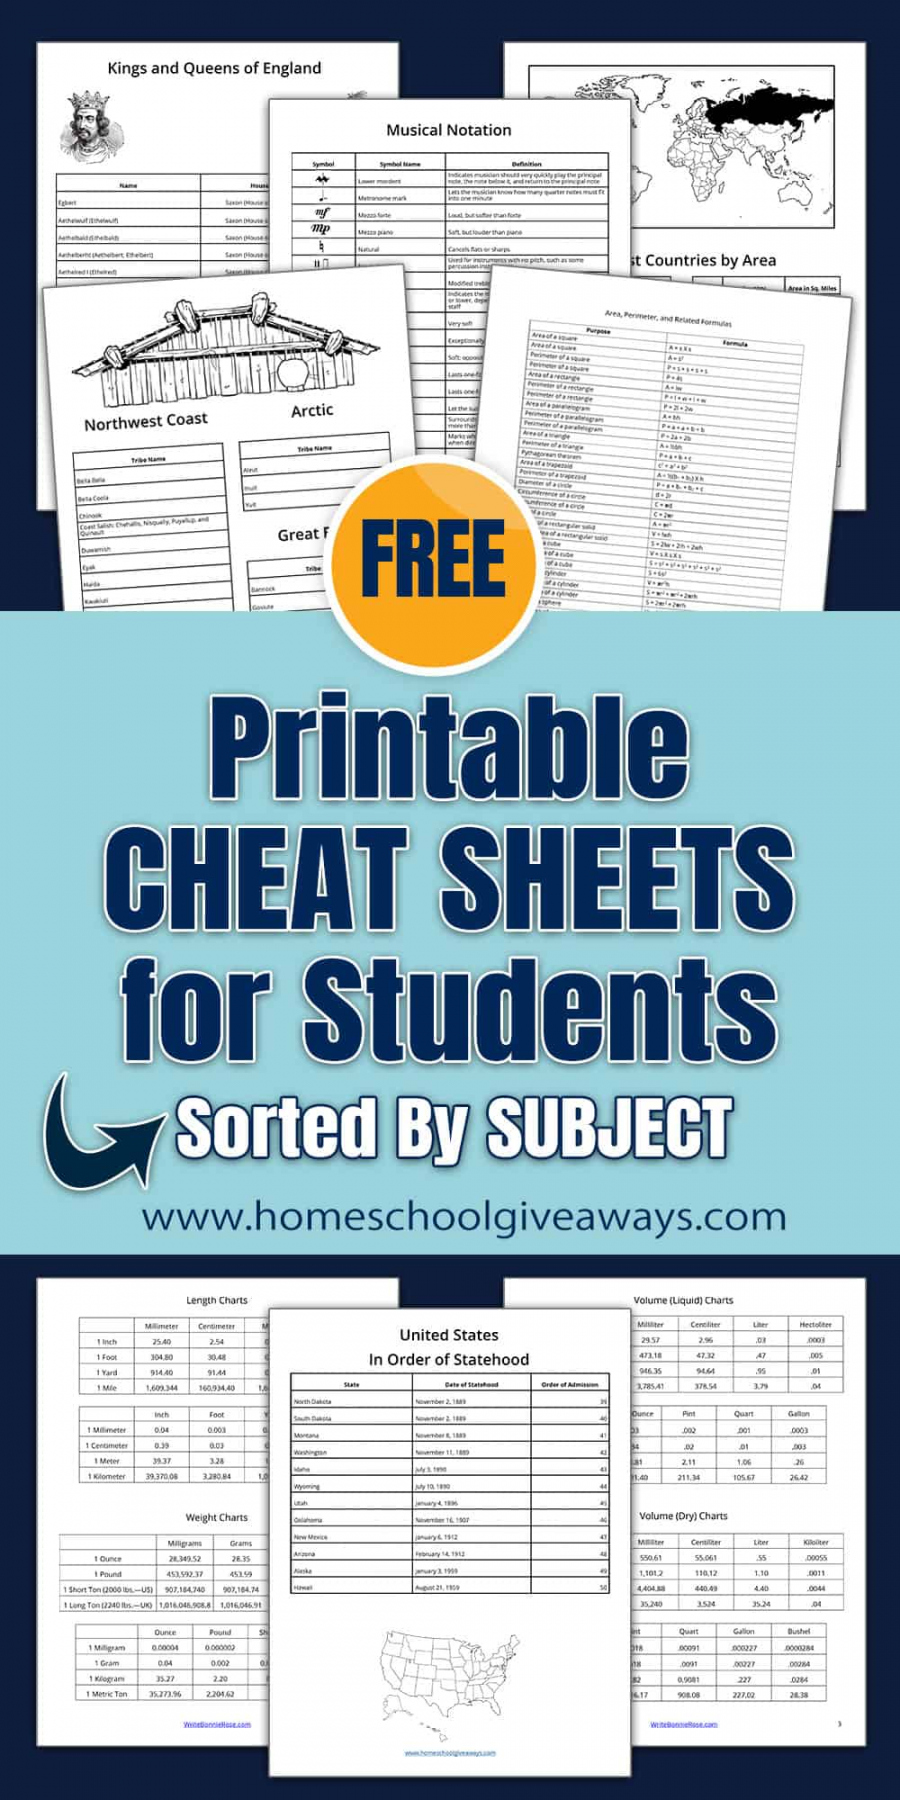 Printable Cheat Sheets for Students by Topic